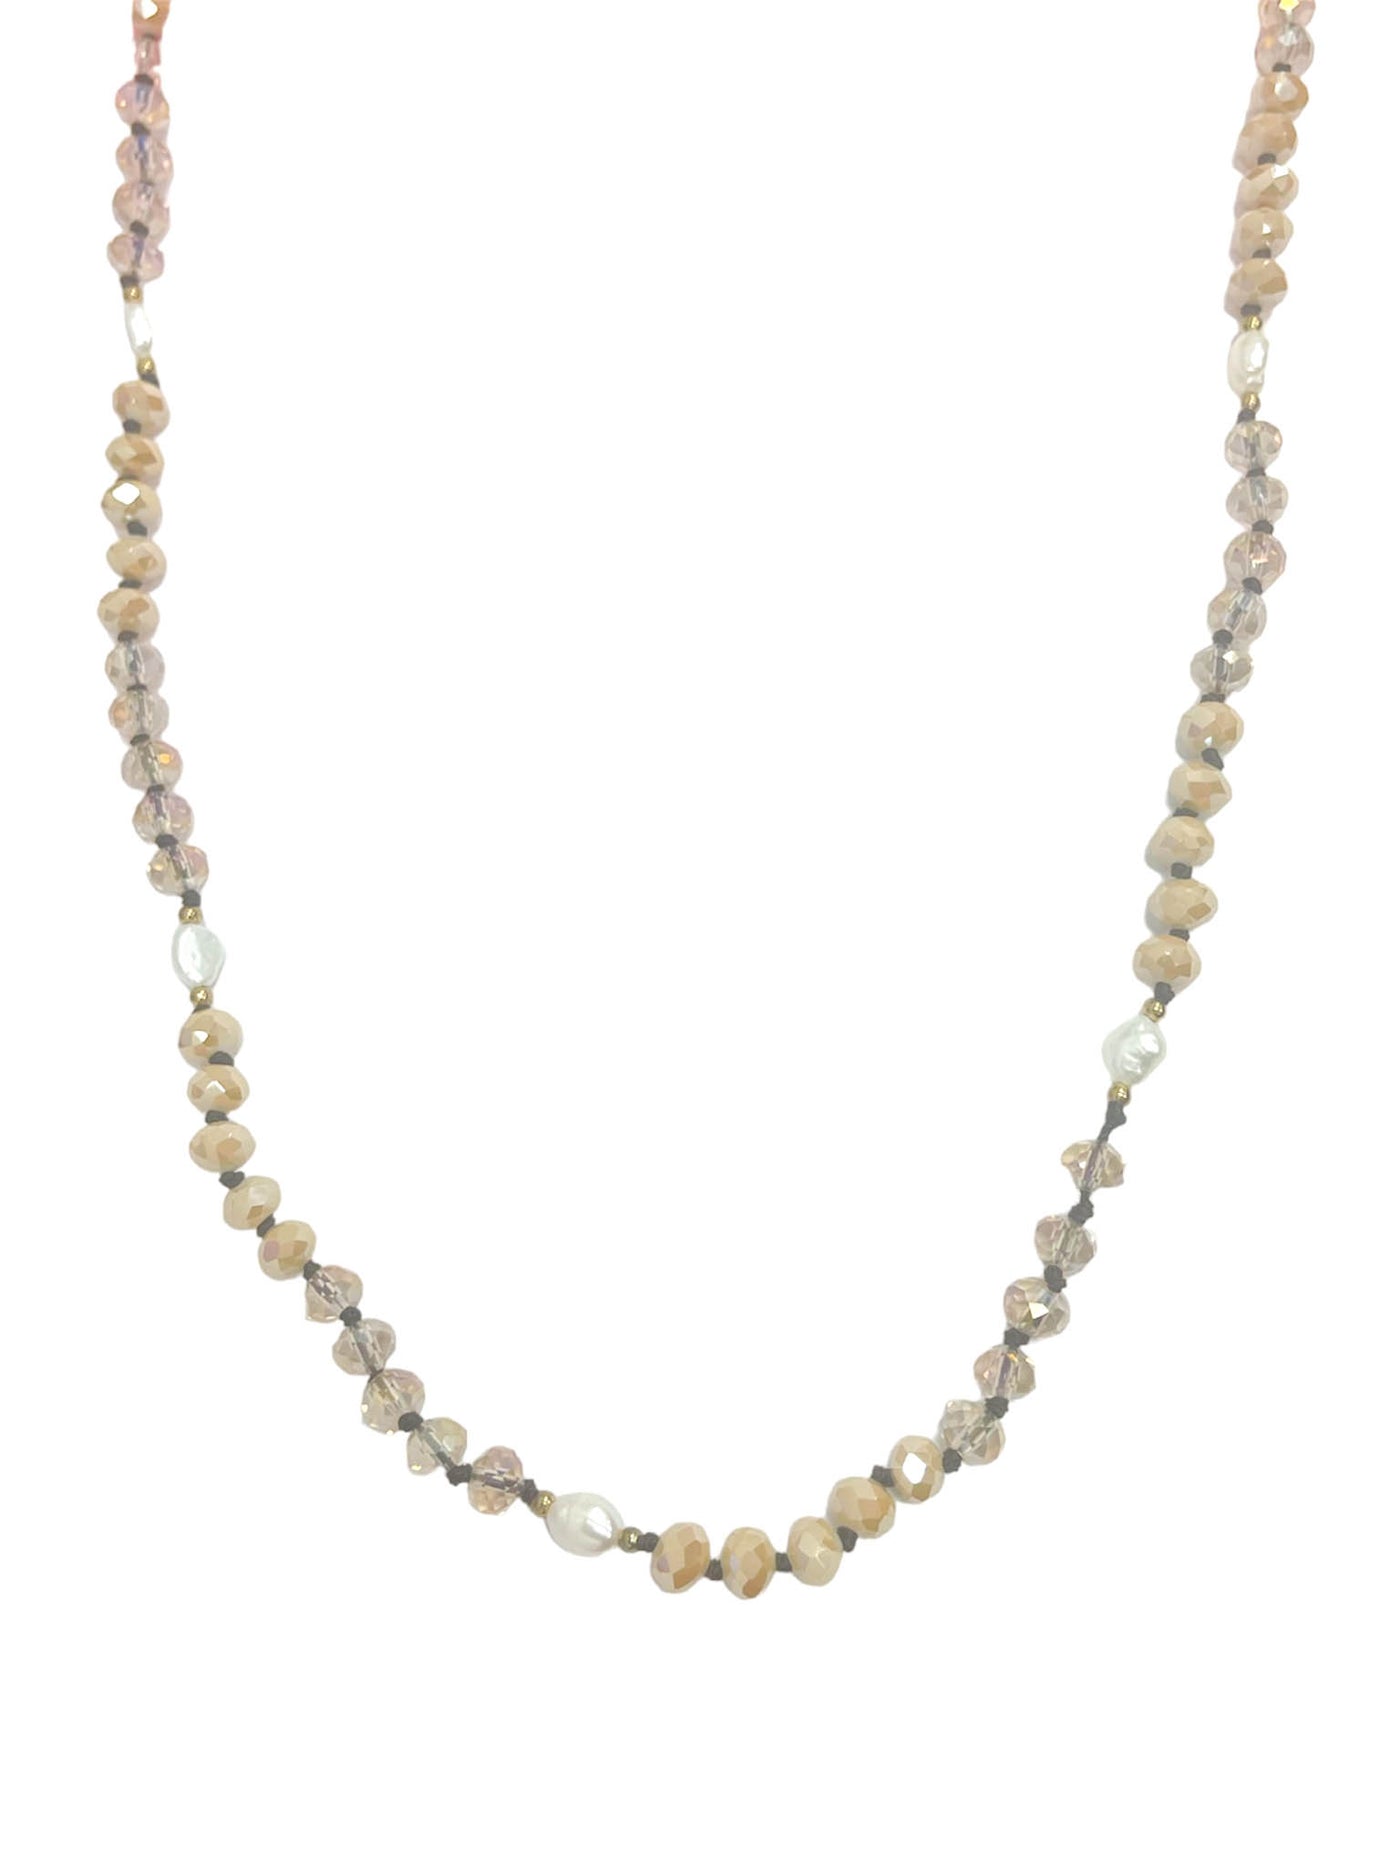 Crystal and Natural Pearl Necklace